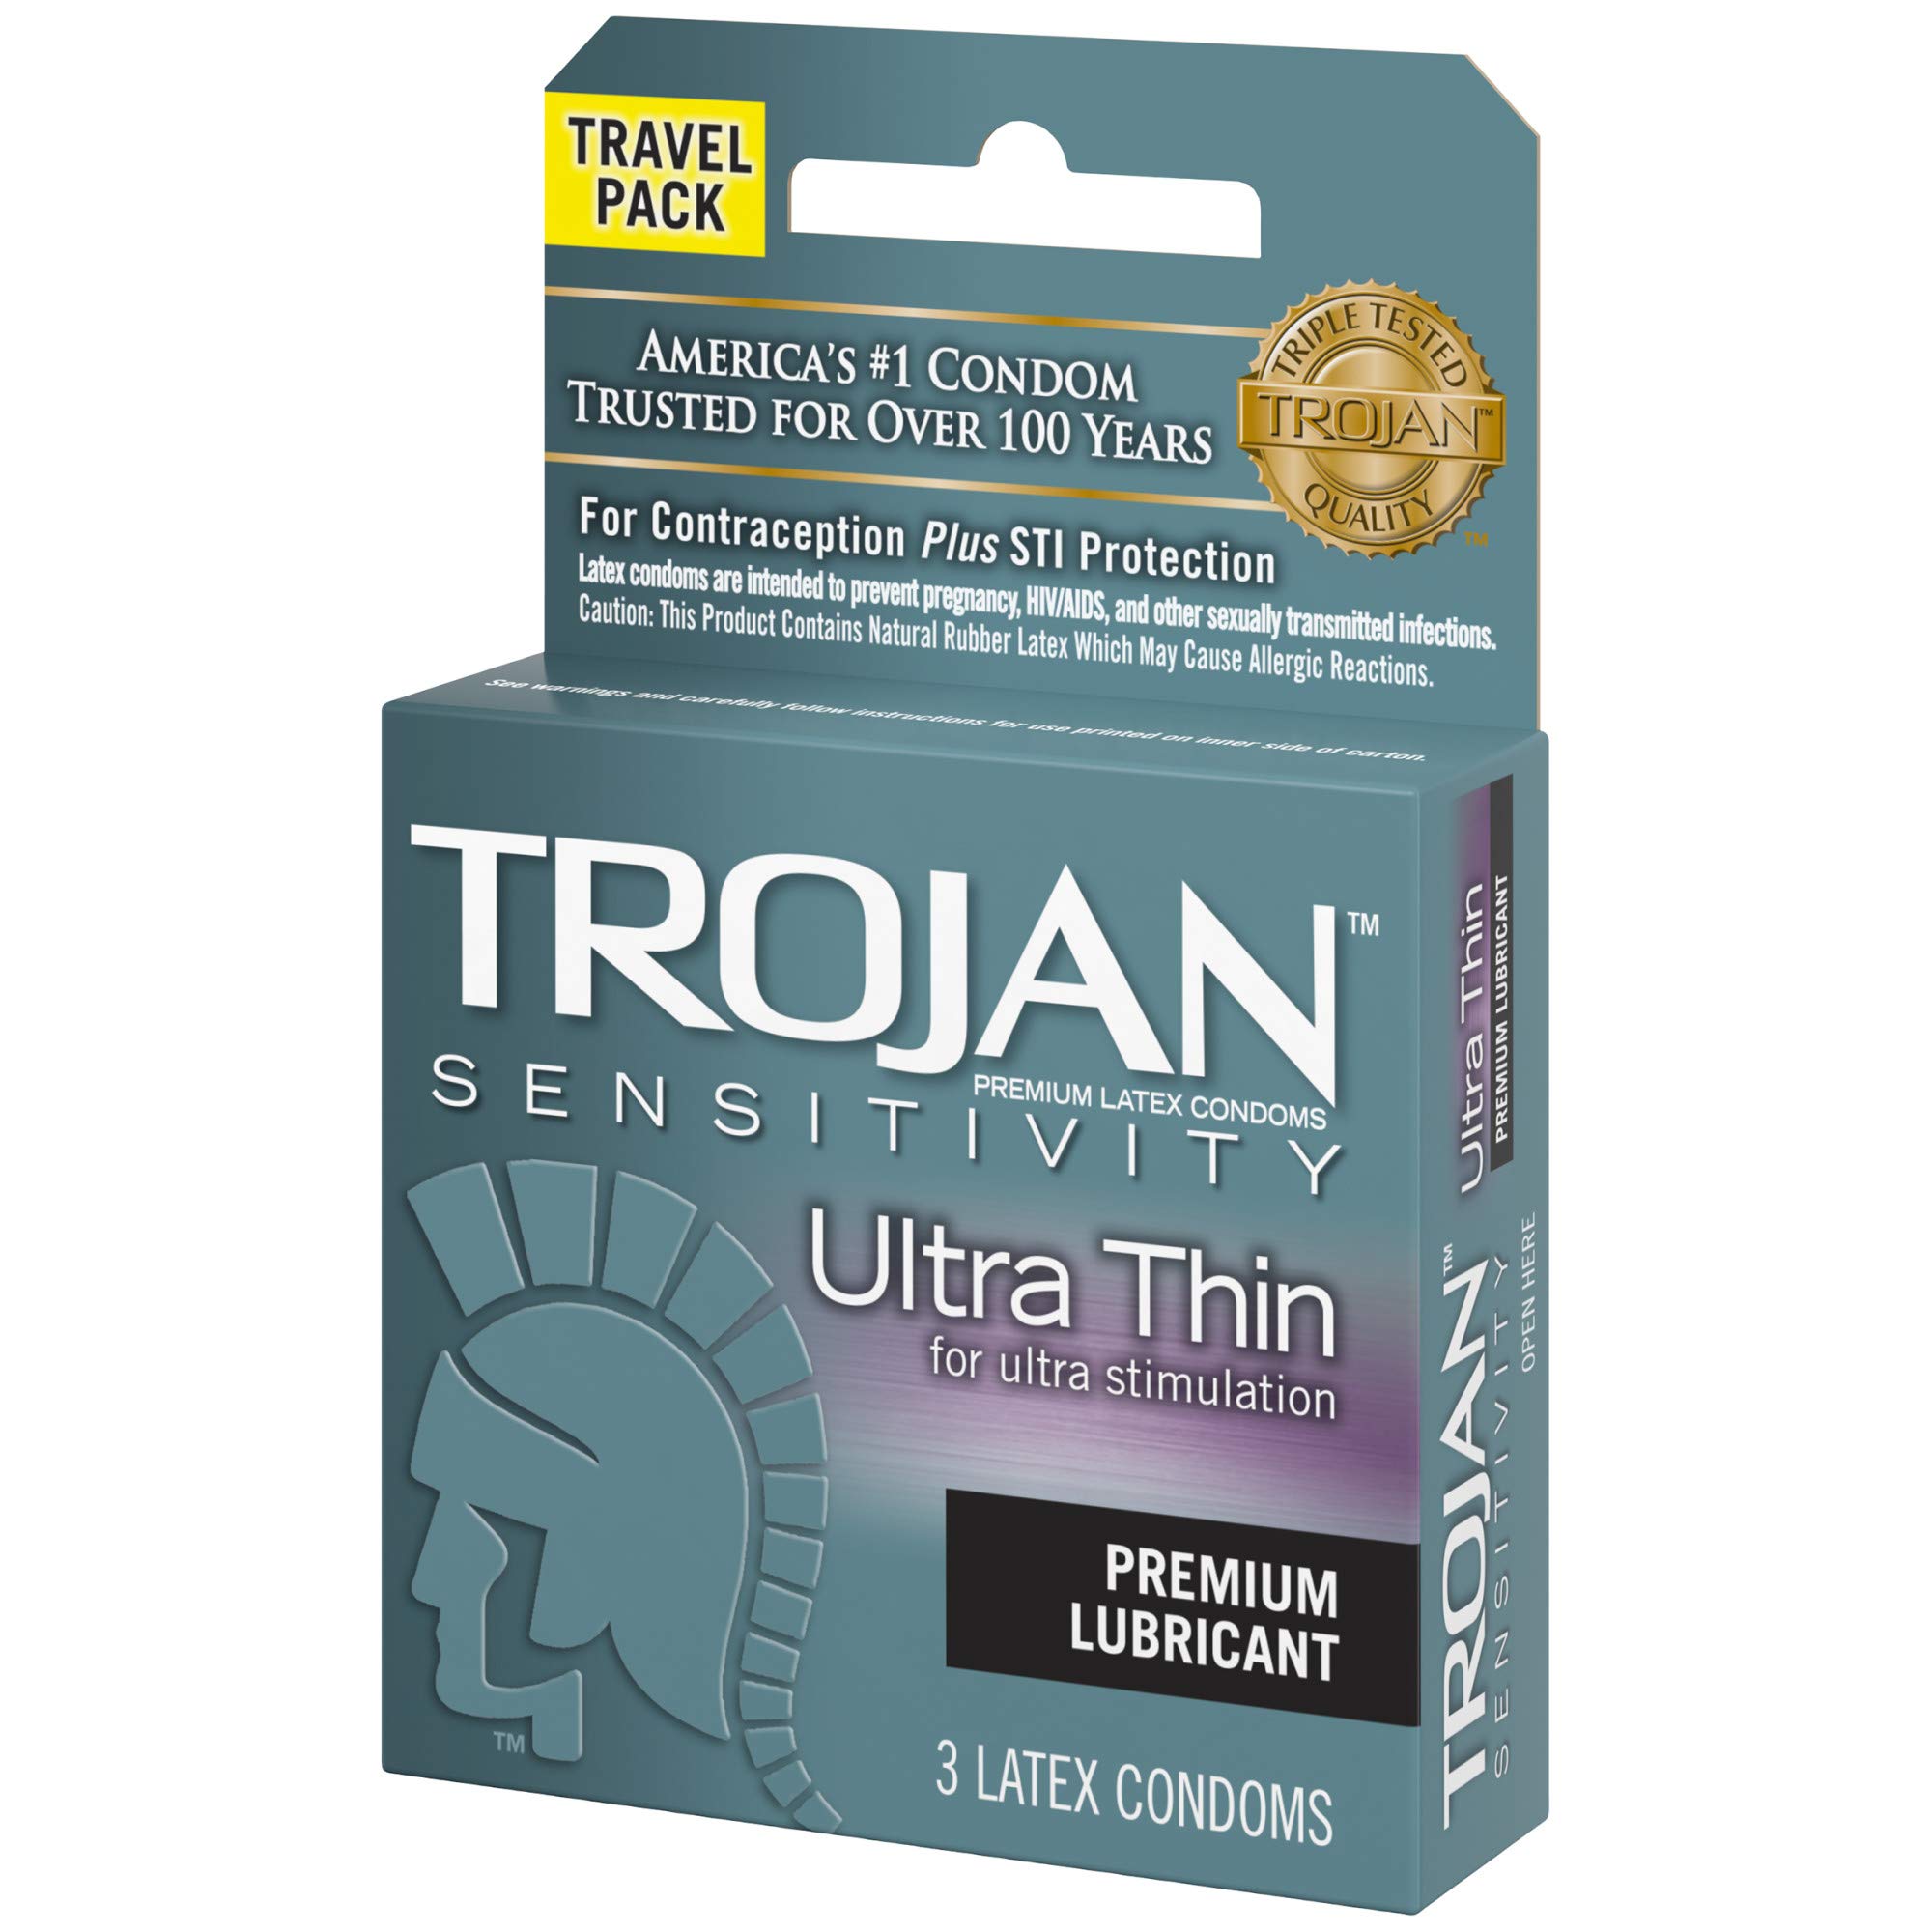 TROJAN Sensitivity Ultra Thin Lubricated Condoms (Pack of 1) 3 Count